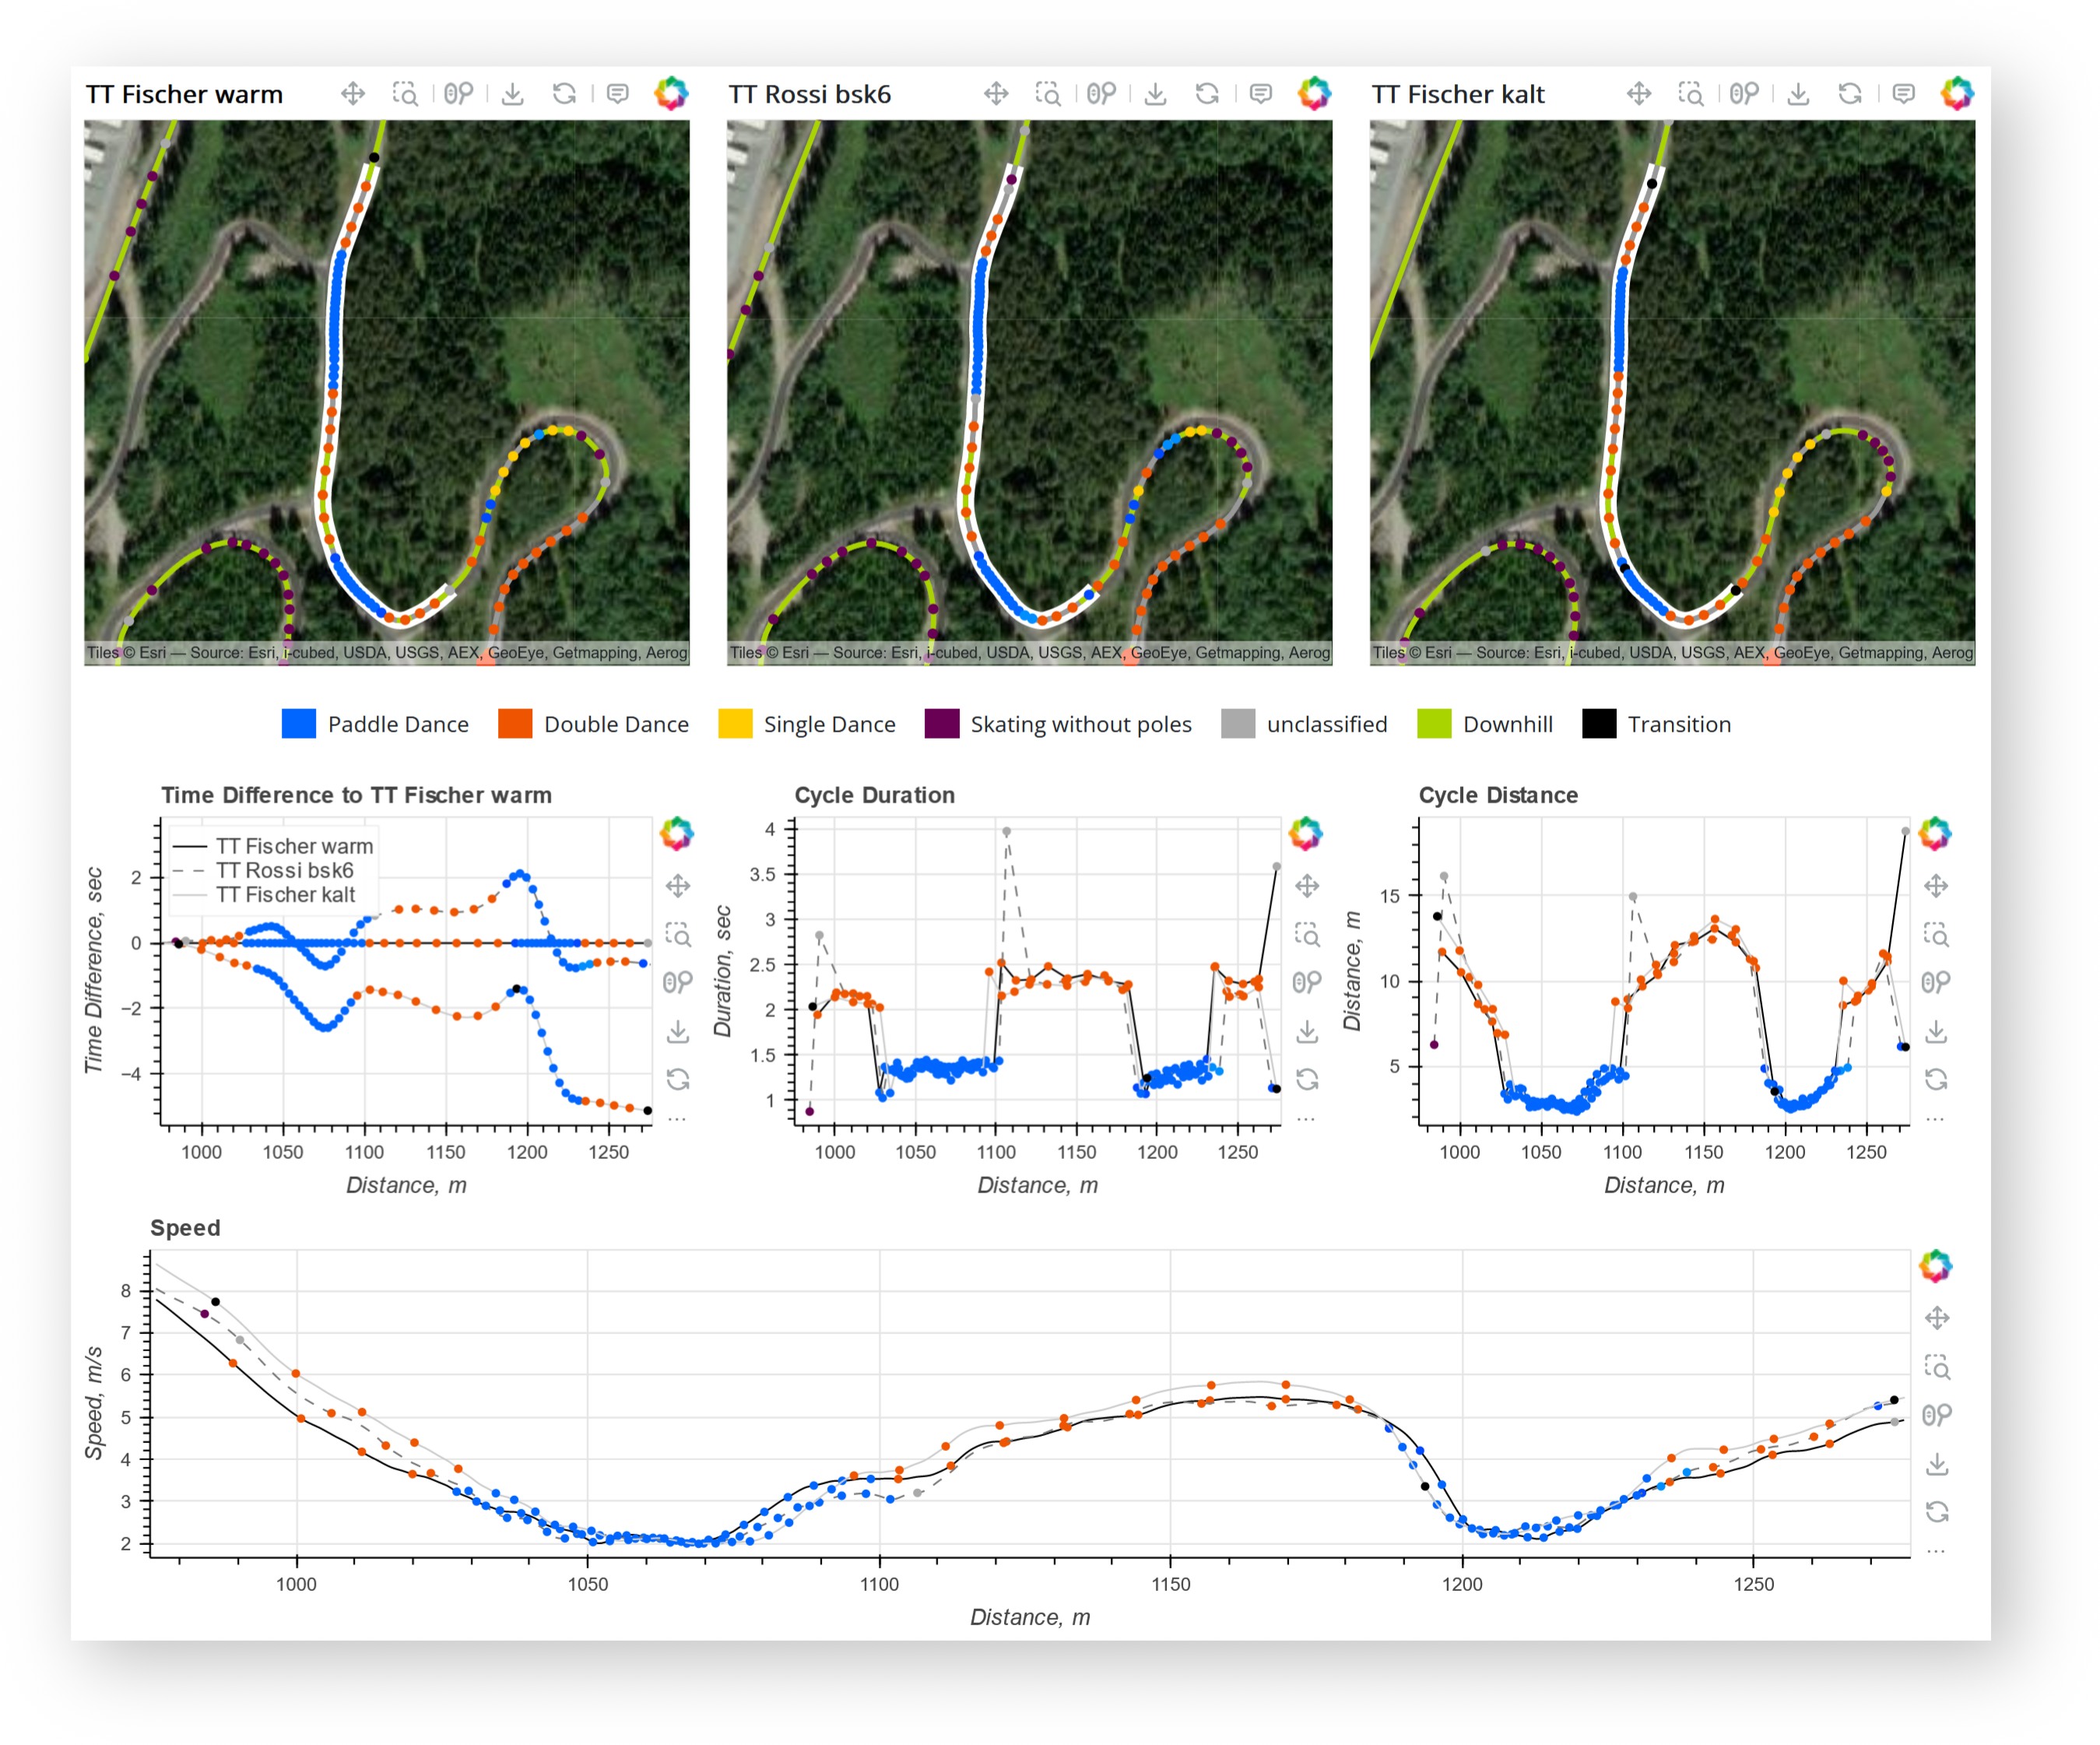 Screenshot of a part of the cross-country skiing performance analysis